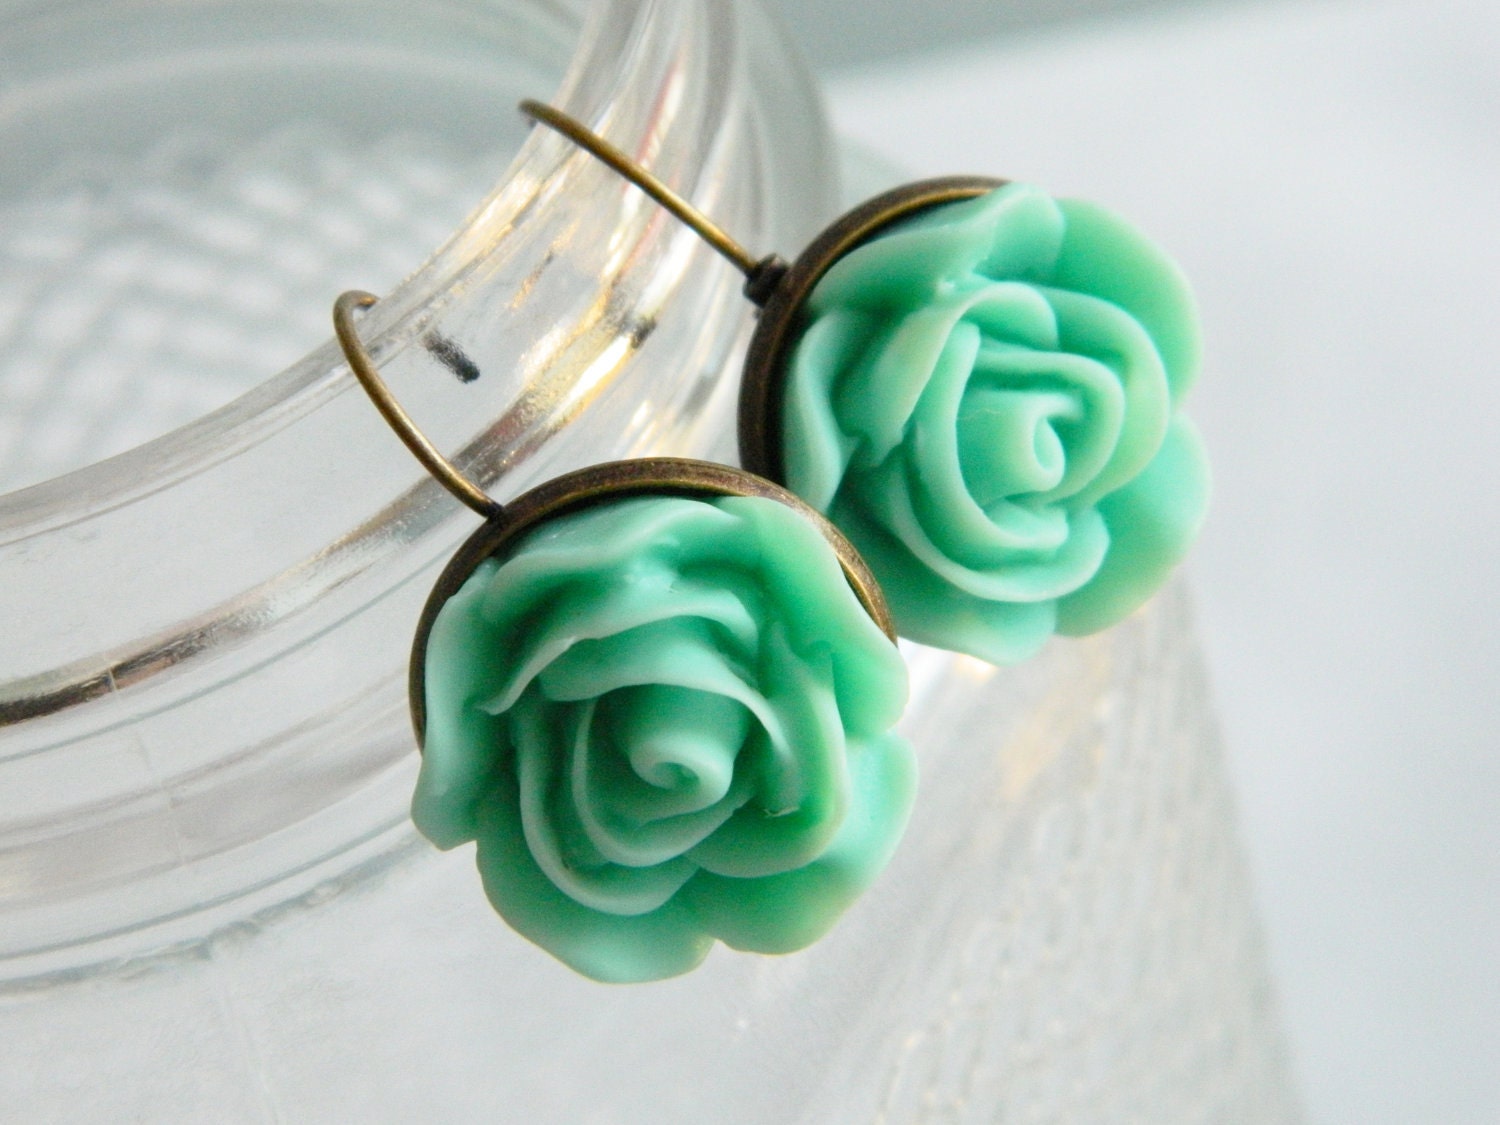 Retro Chic Earrings Vintage Style Mint Green Roses - Jadeite Queen